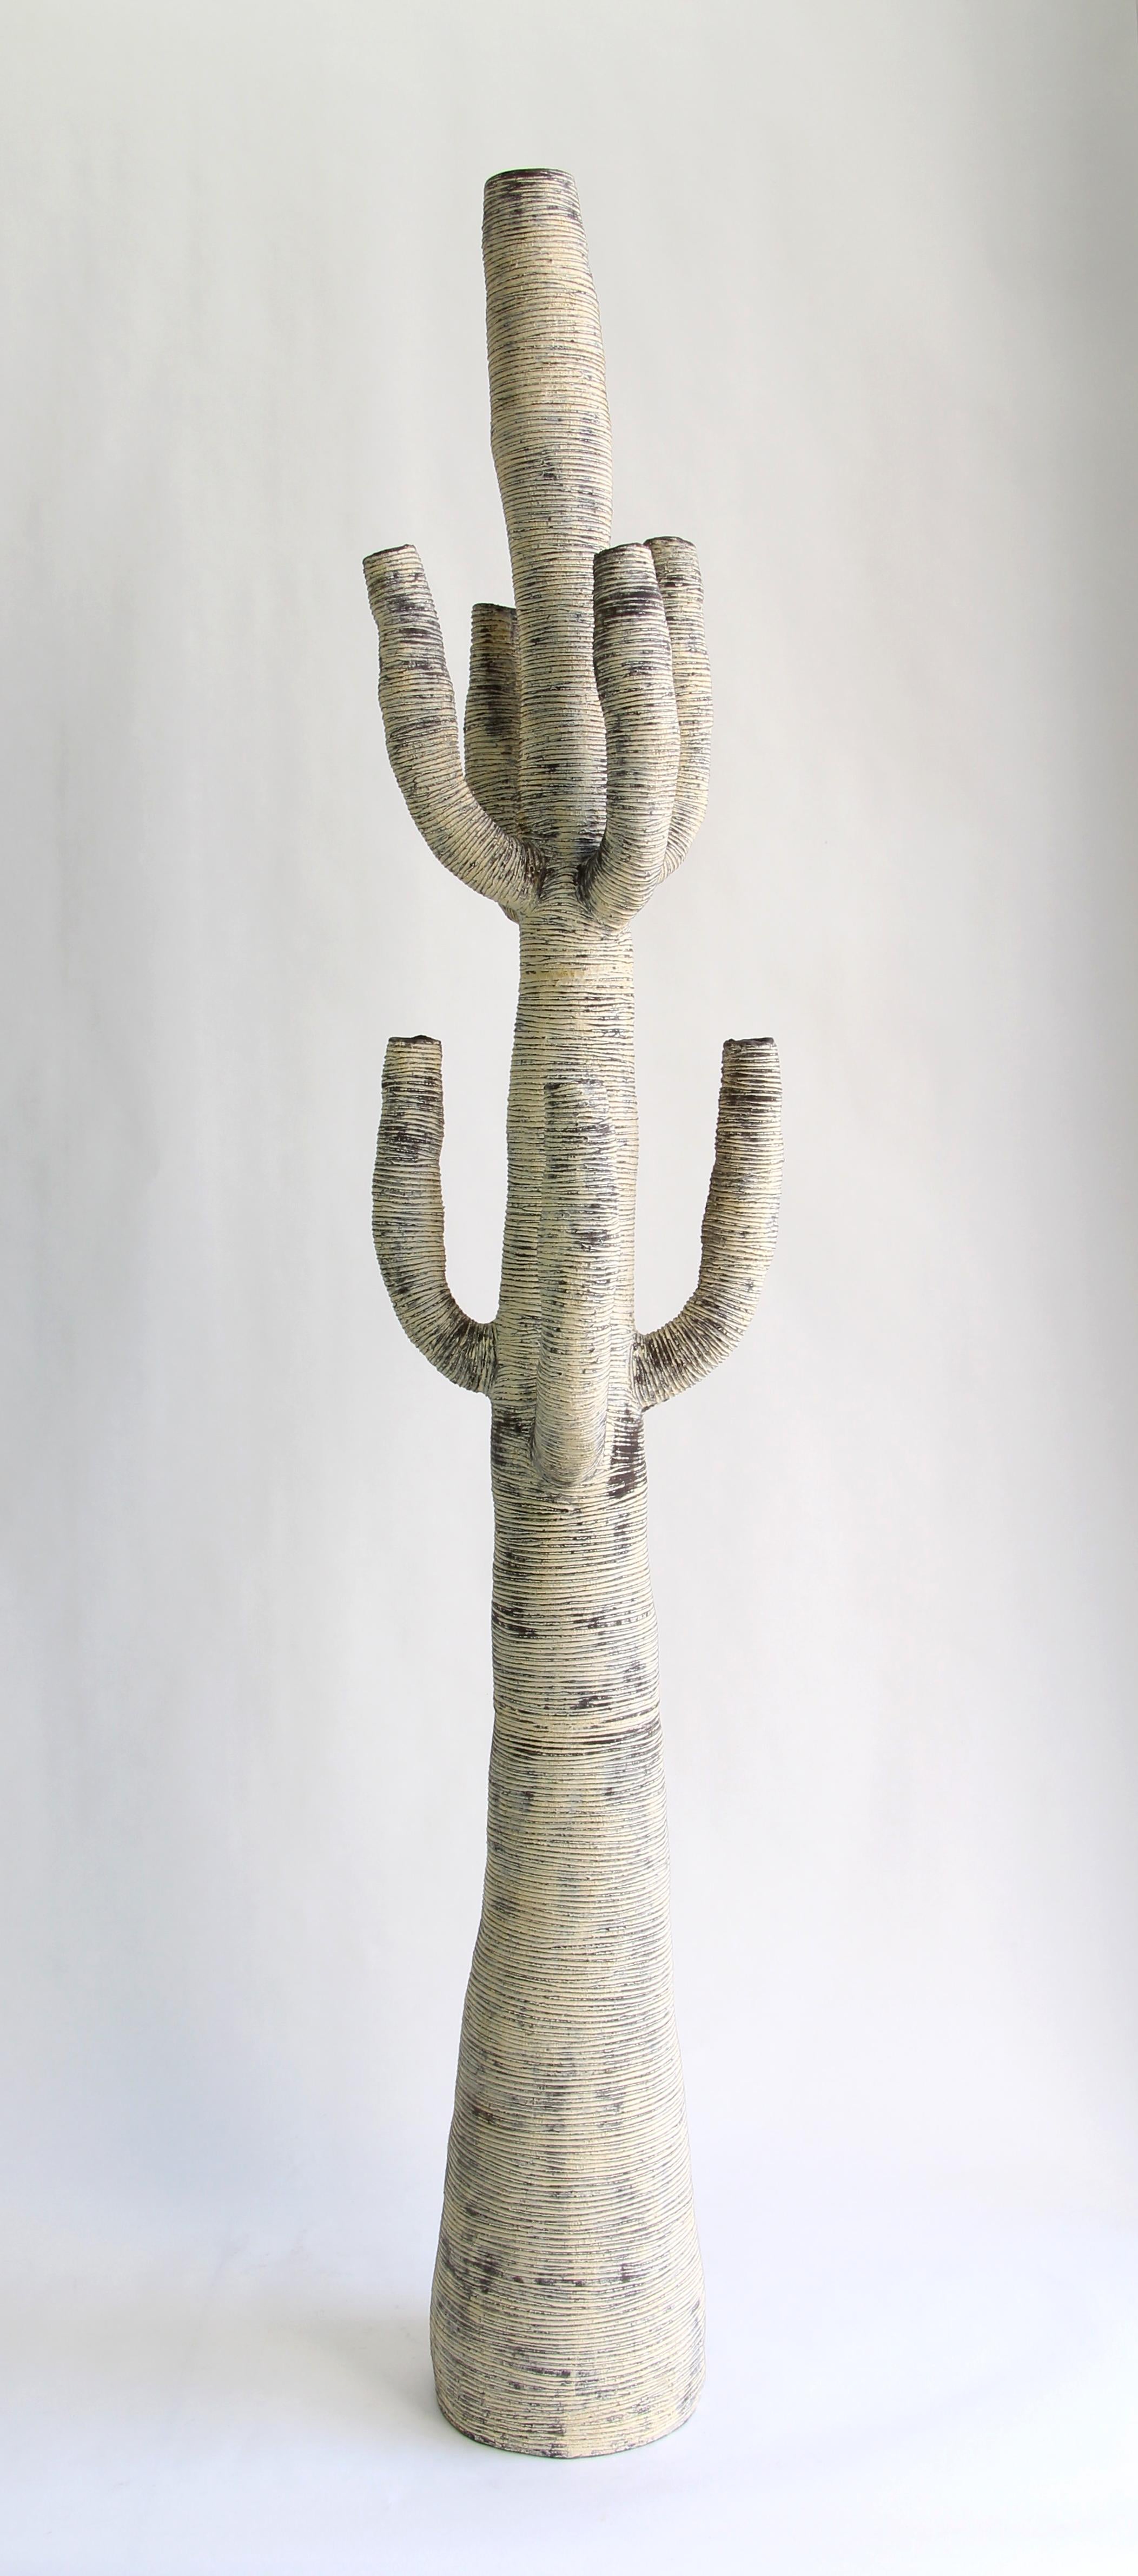 Large black and white stoneware cactus created by Julie Bergeron. The organic forms and rich textures express the intense beauty of nature in all its irregularity. Rich variations in tone, from the deep undertones of the brown/black stoneware to the